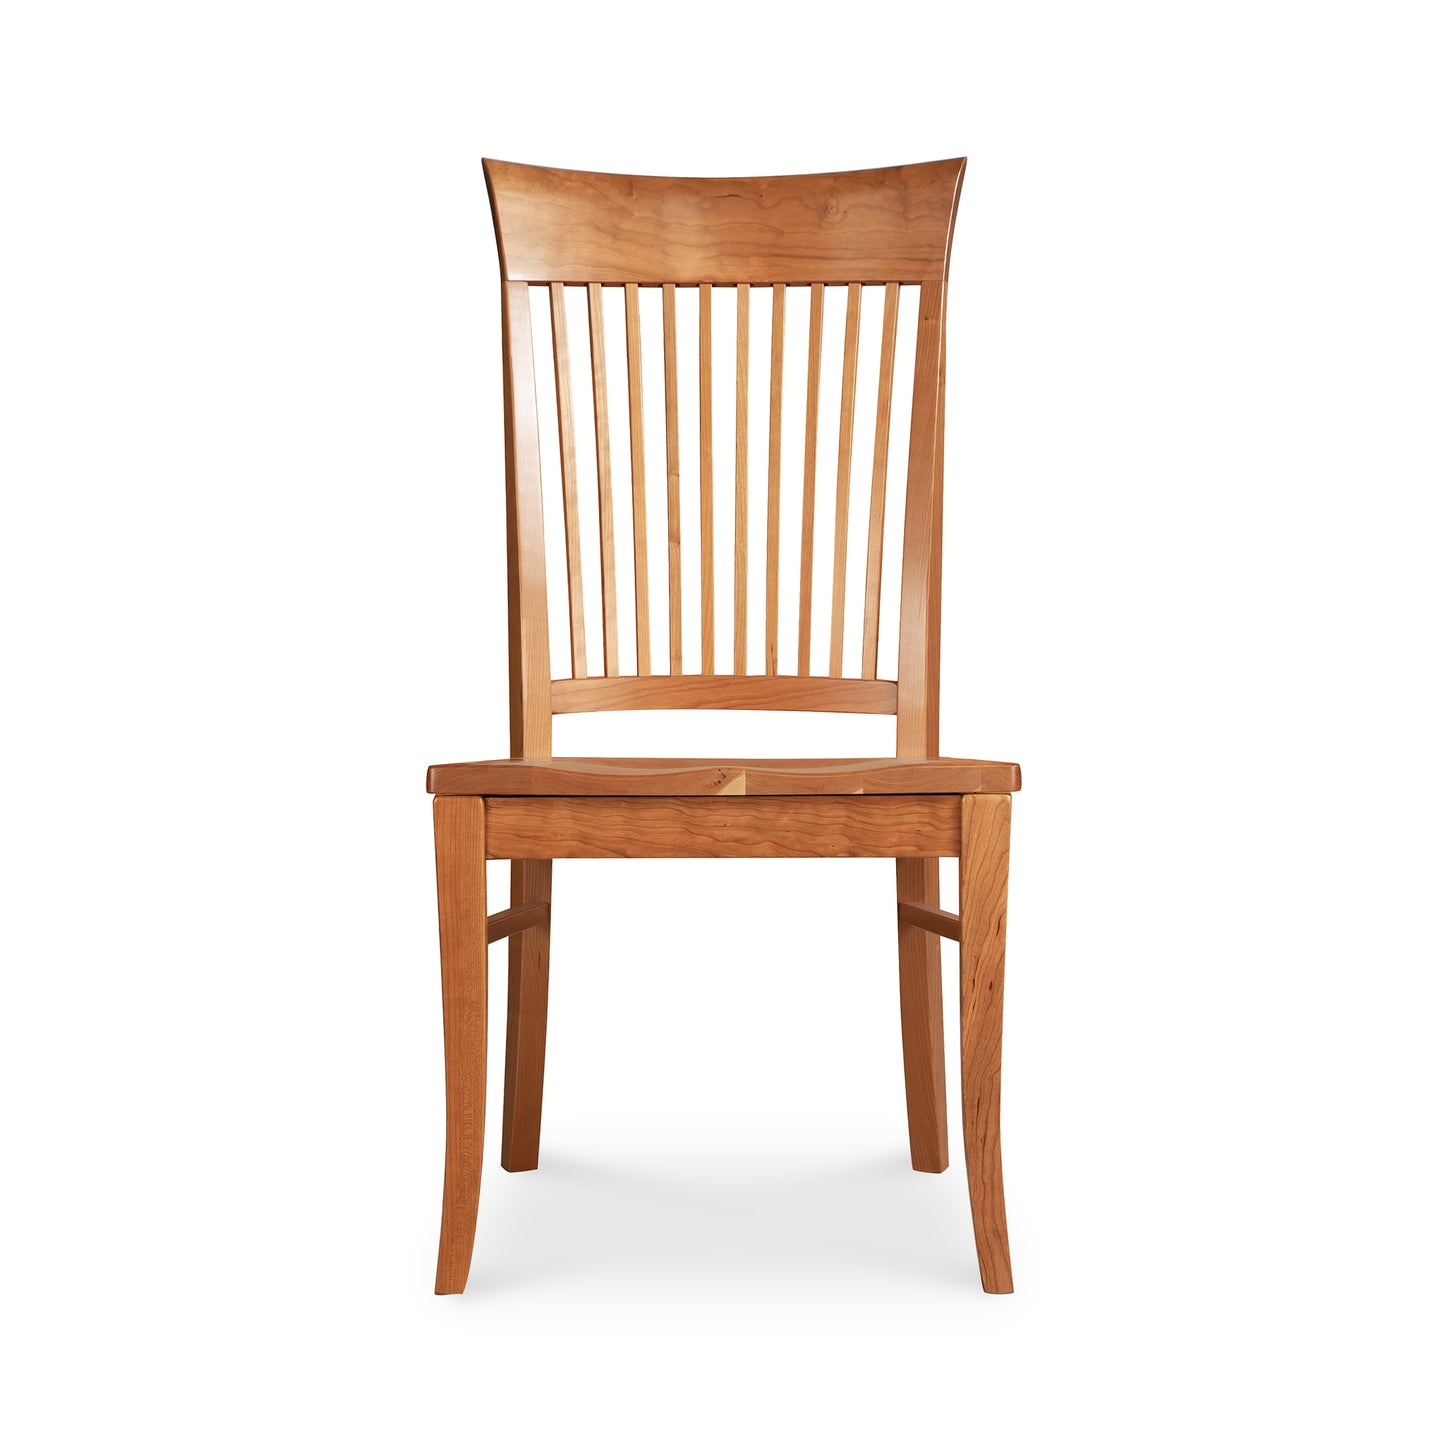 A Vermont Woods Studios Contemporary Shaker Chair with Wood Seat, with a tall, slatted backrest and a scooped wooden seat, standing on four legs against a white background.